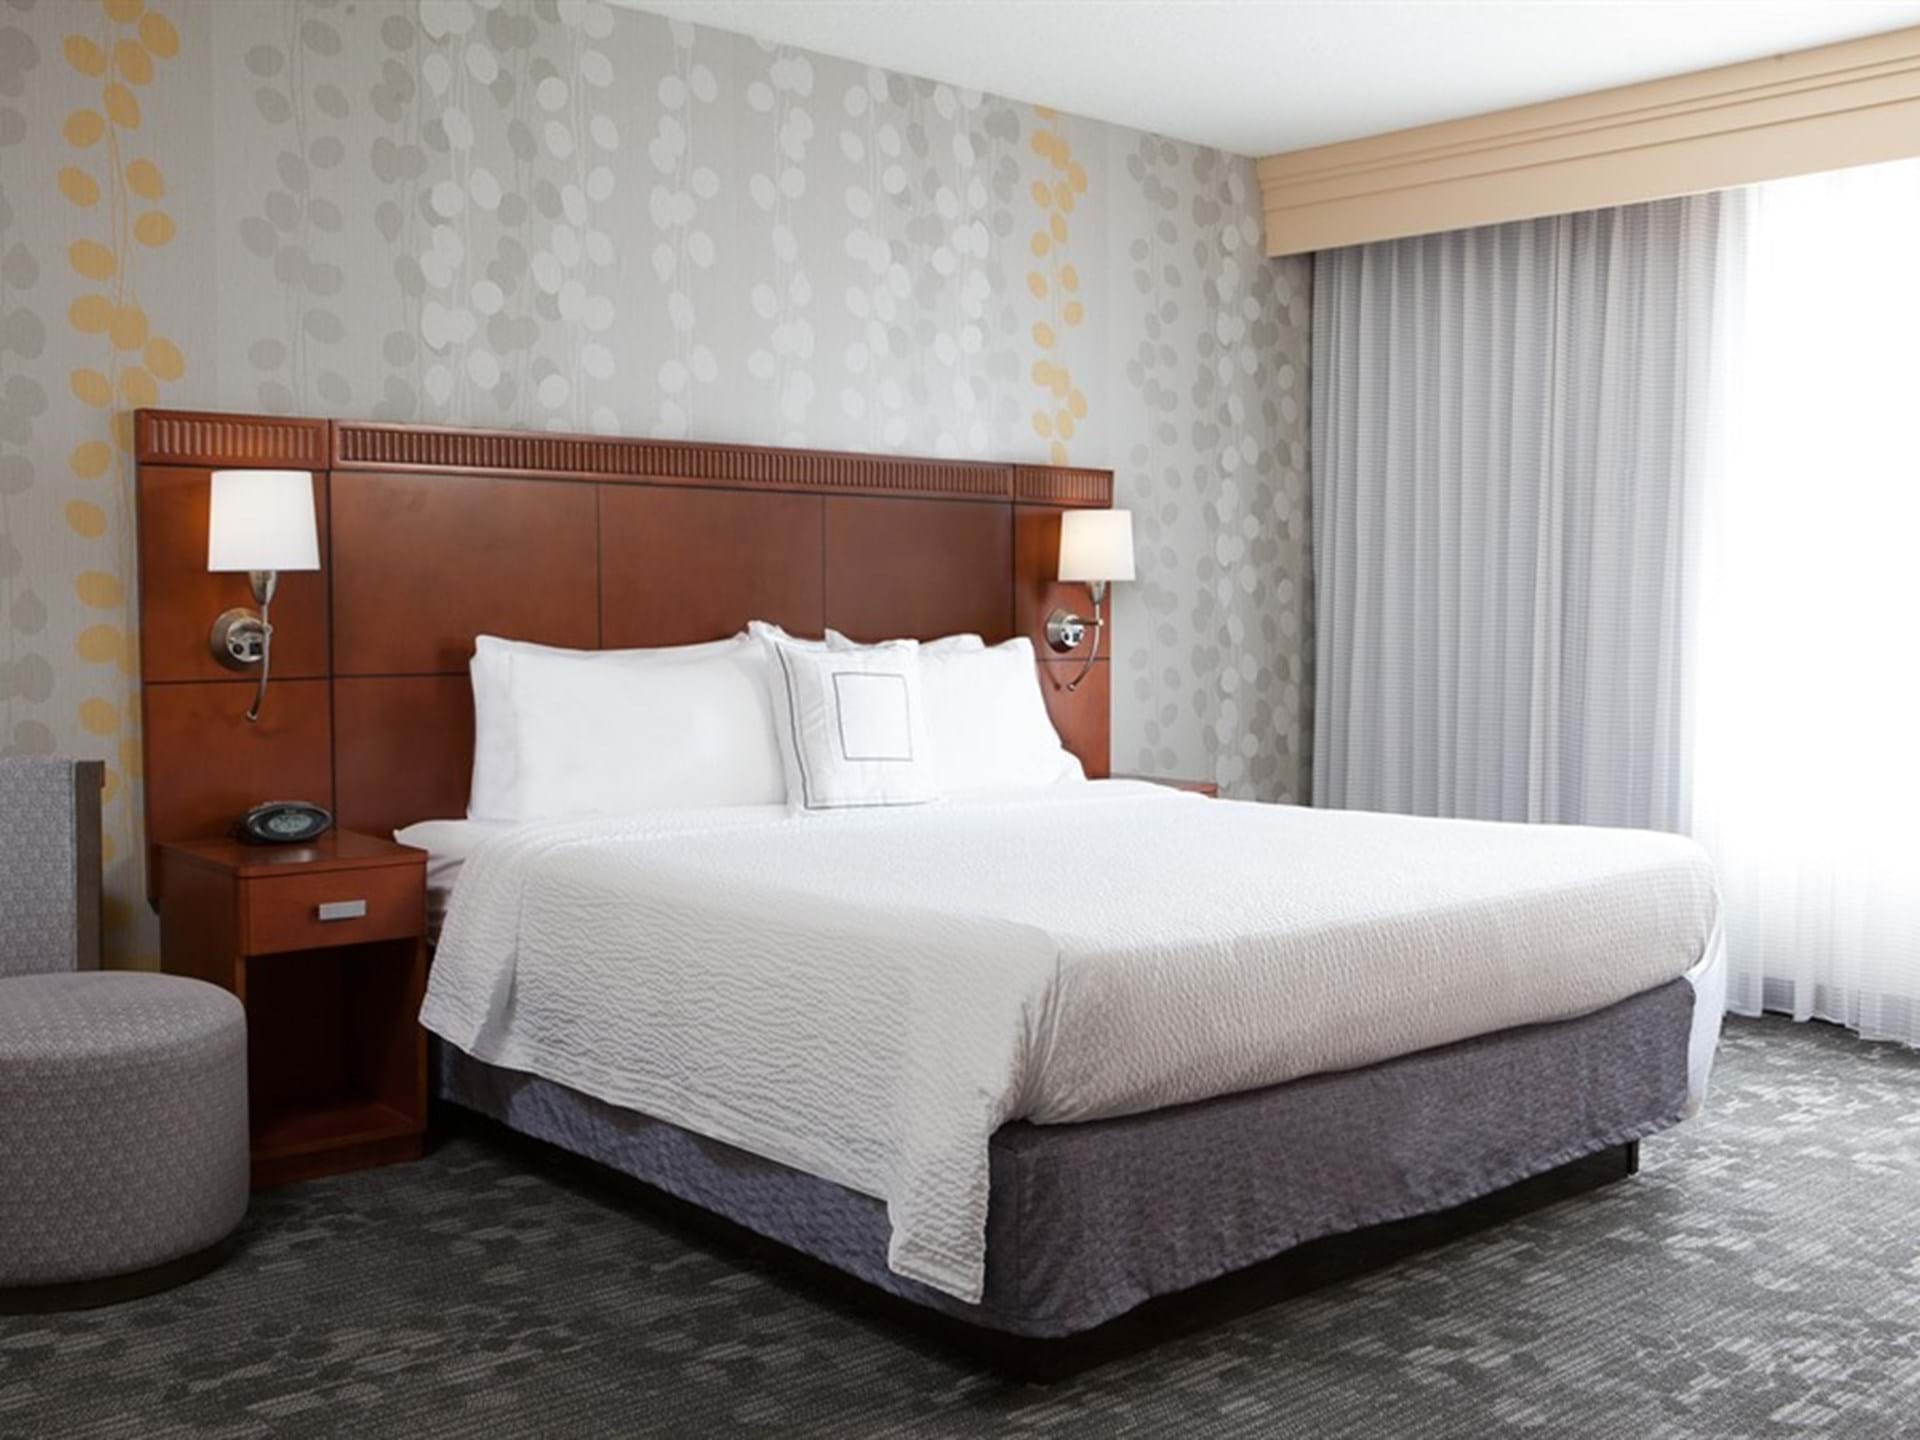 Newly renovated guest rooms!